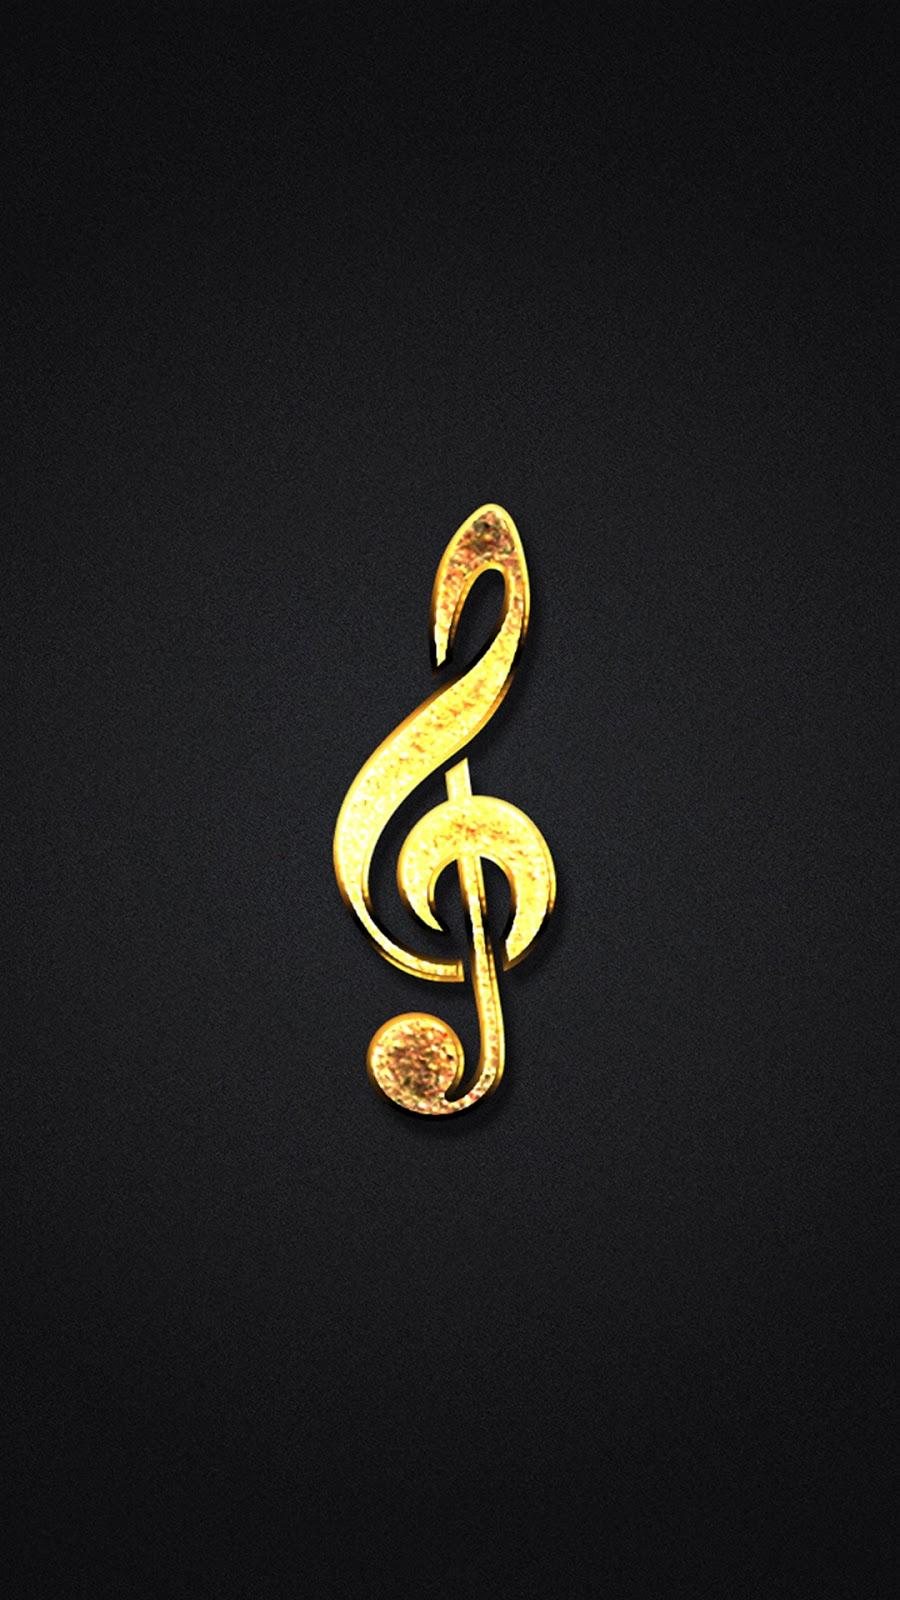 Golden Music Background iPhone 7 And iPhone 7 Plus